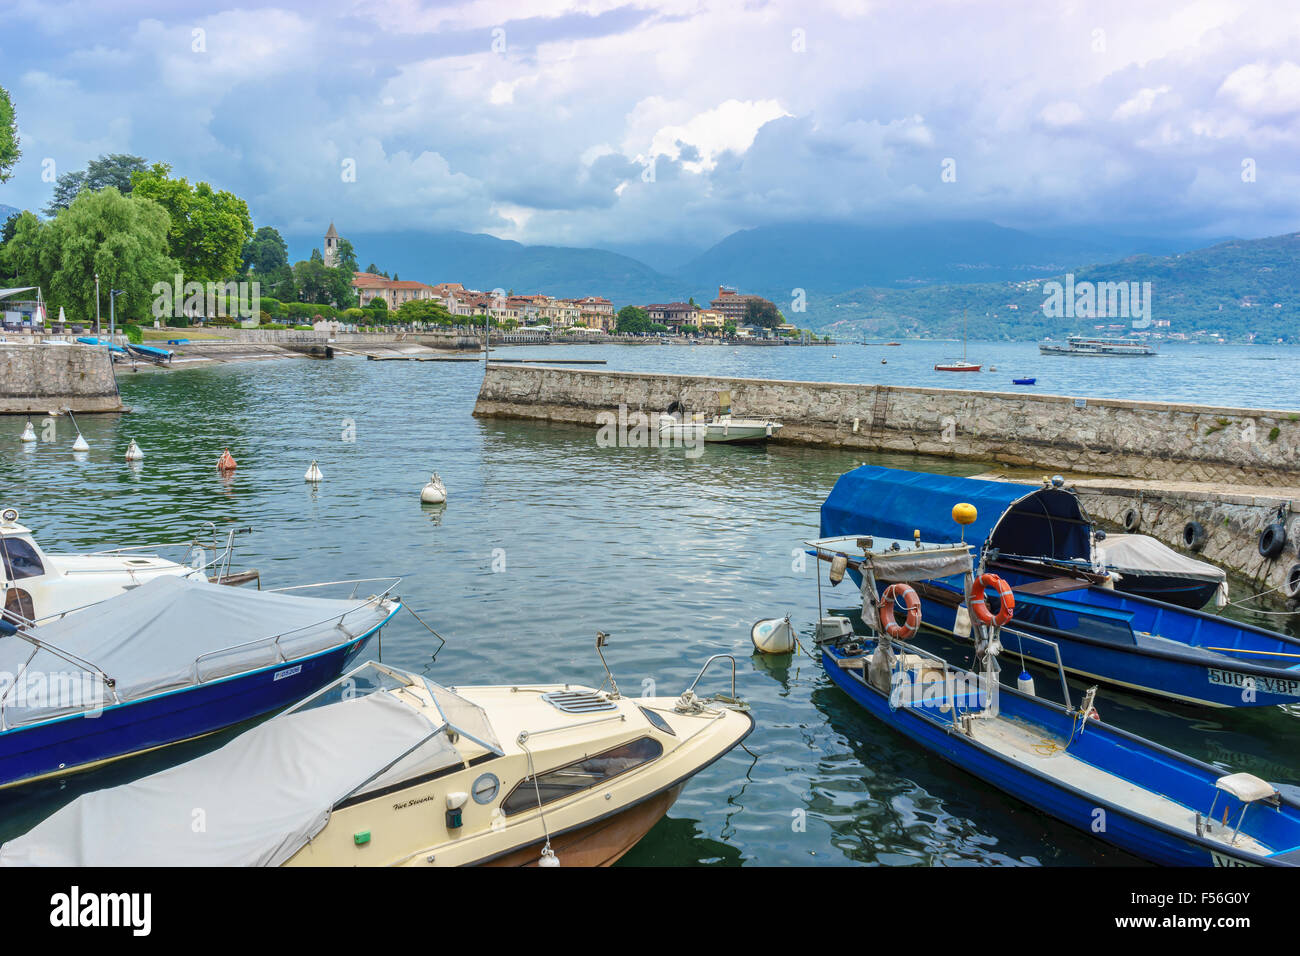 Boats sit in a harbor on Lake Maggiore in summer. Stock Photo